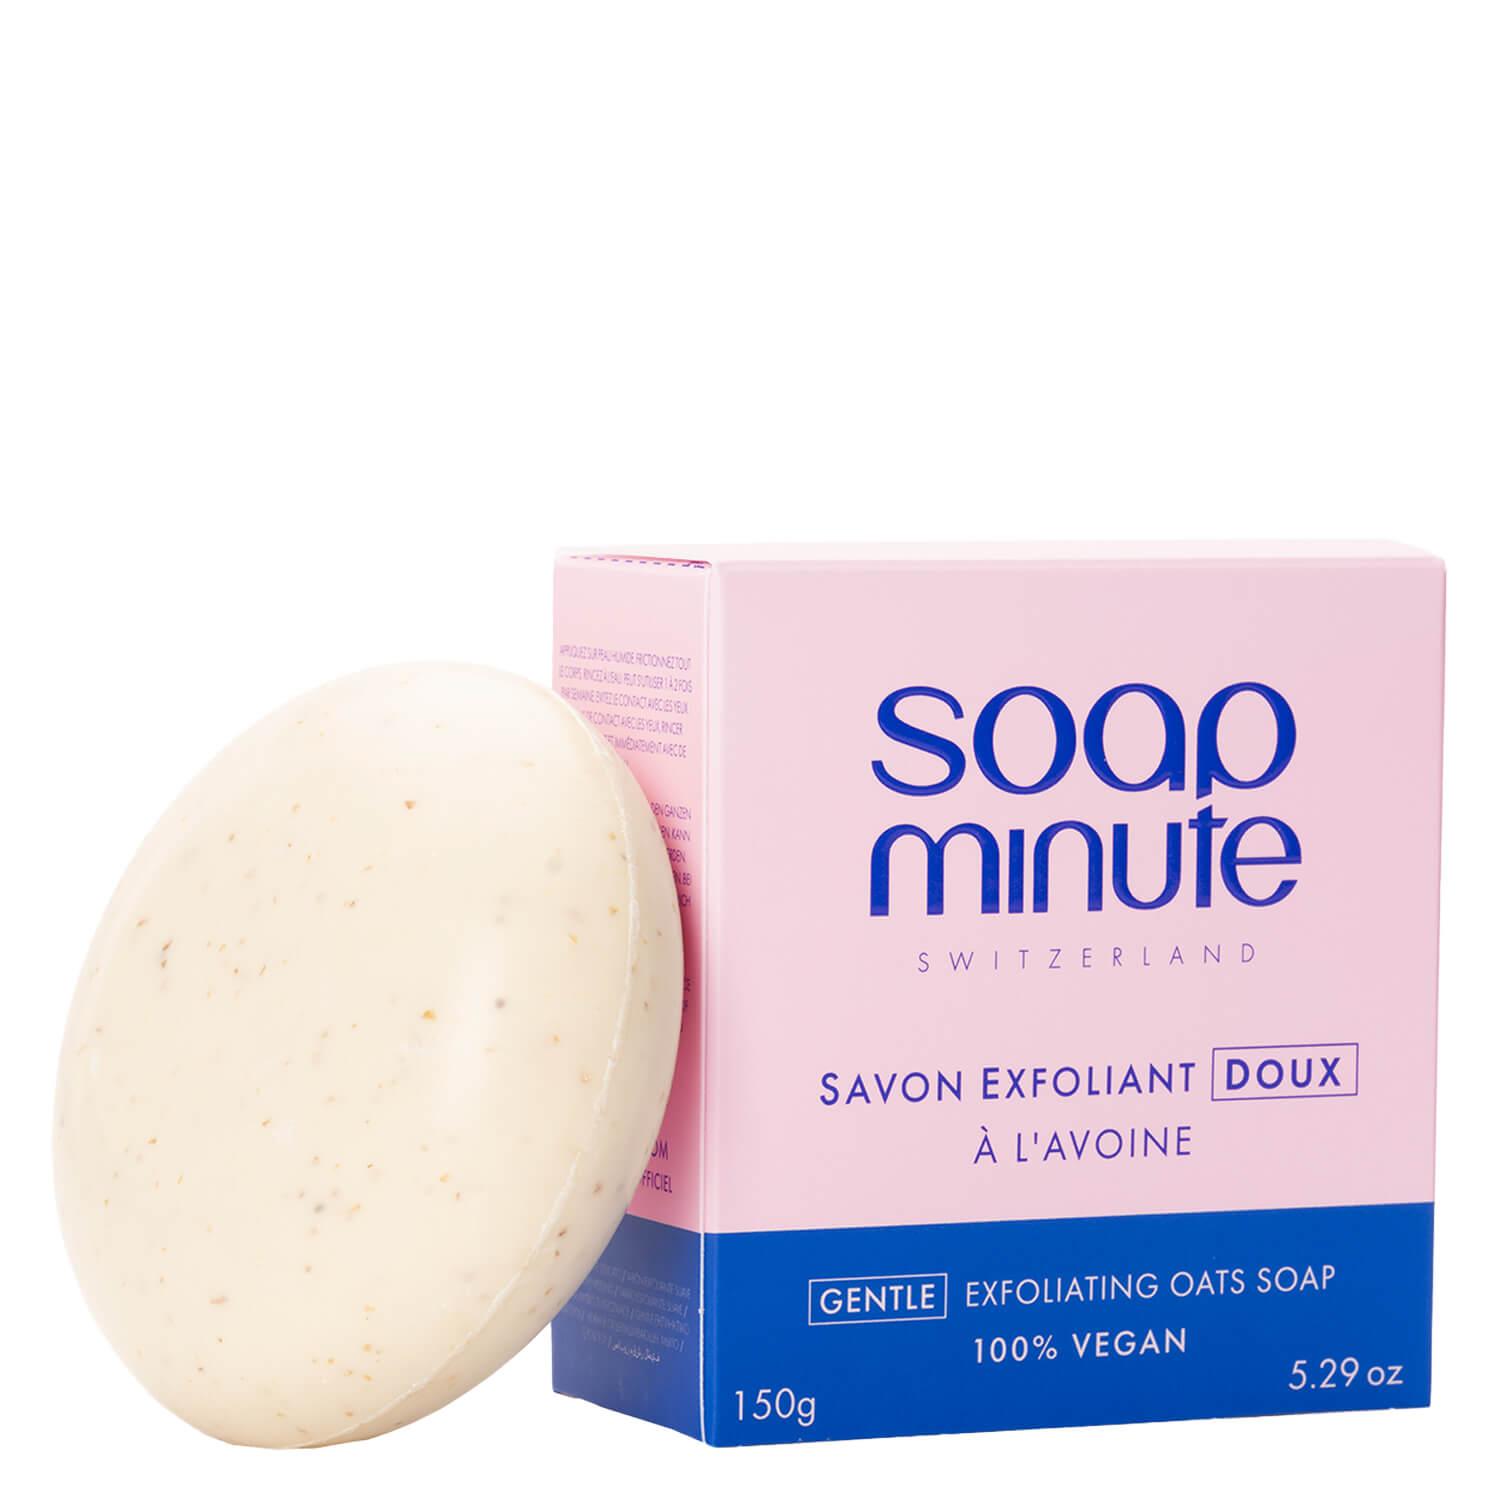 soapminute - Sanfte Peeling-Seife mit Hafer